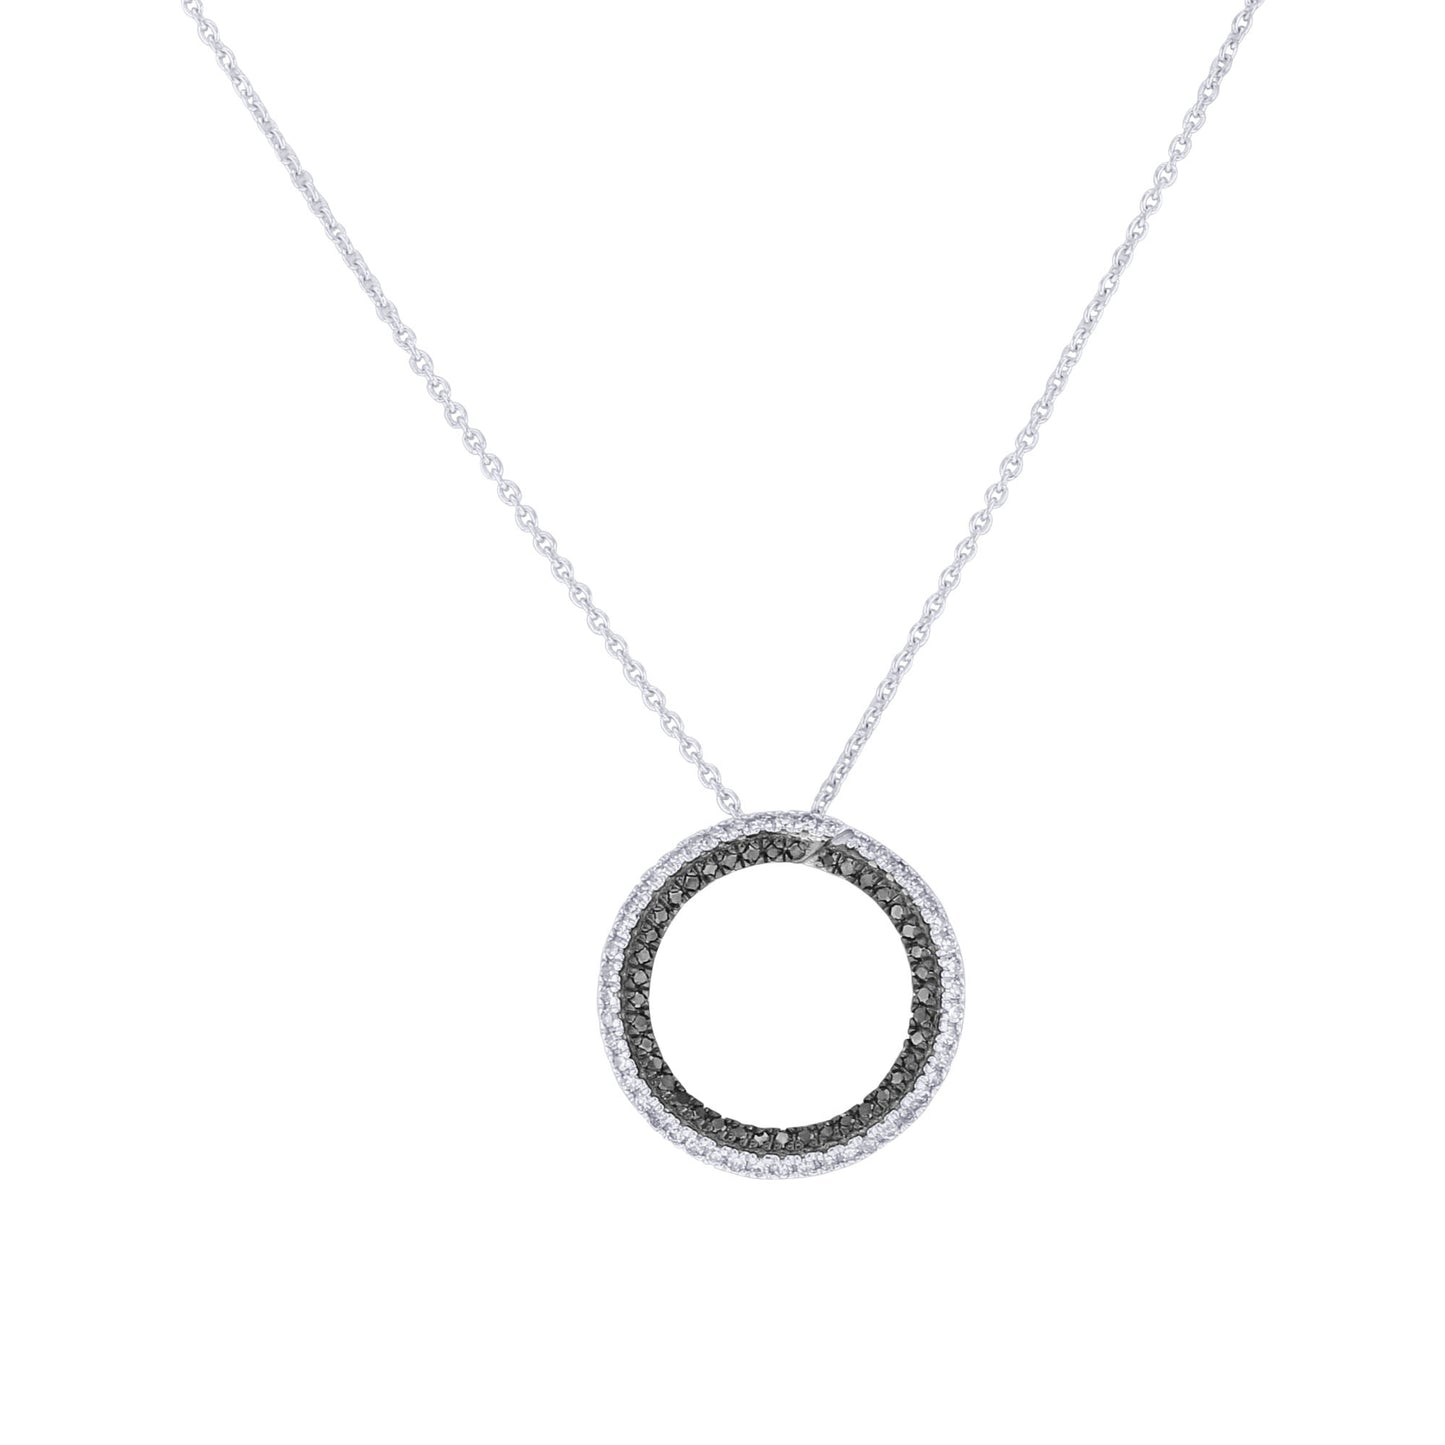 Silver Enchanting Circle Black and White Diamond Necklace